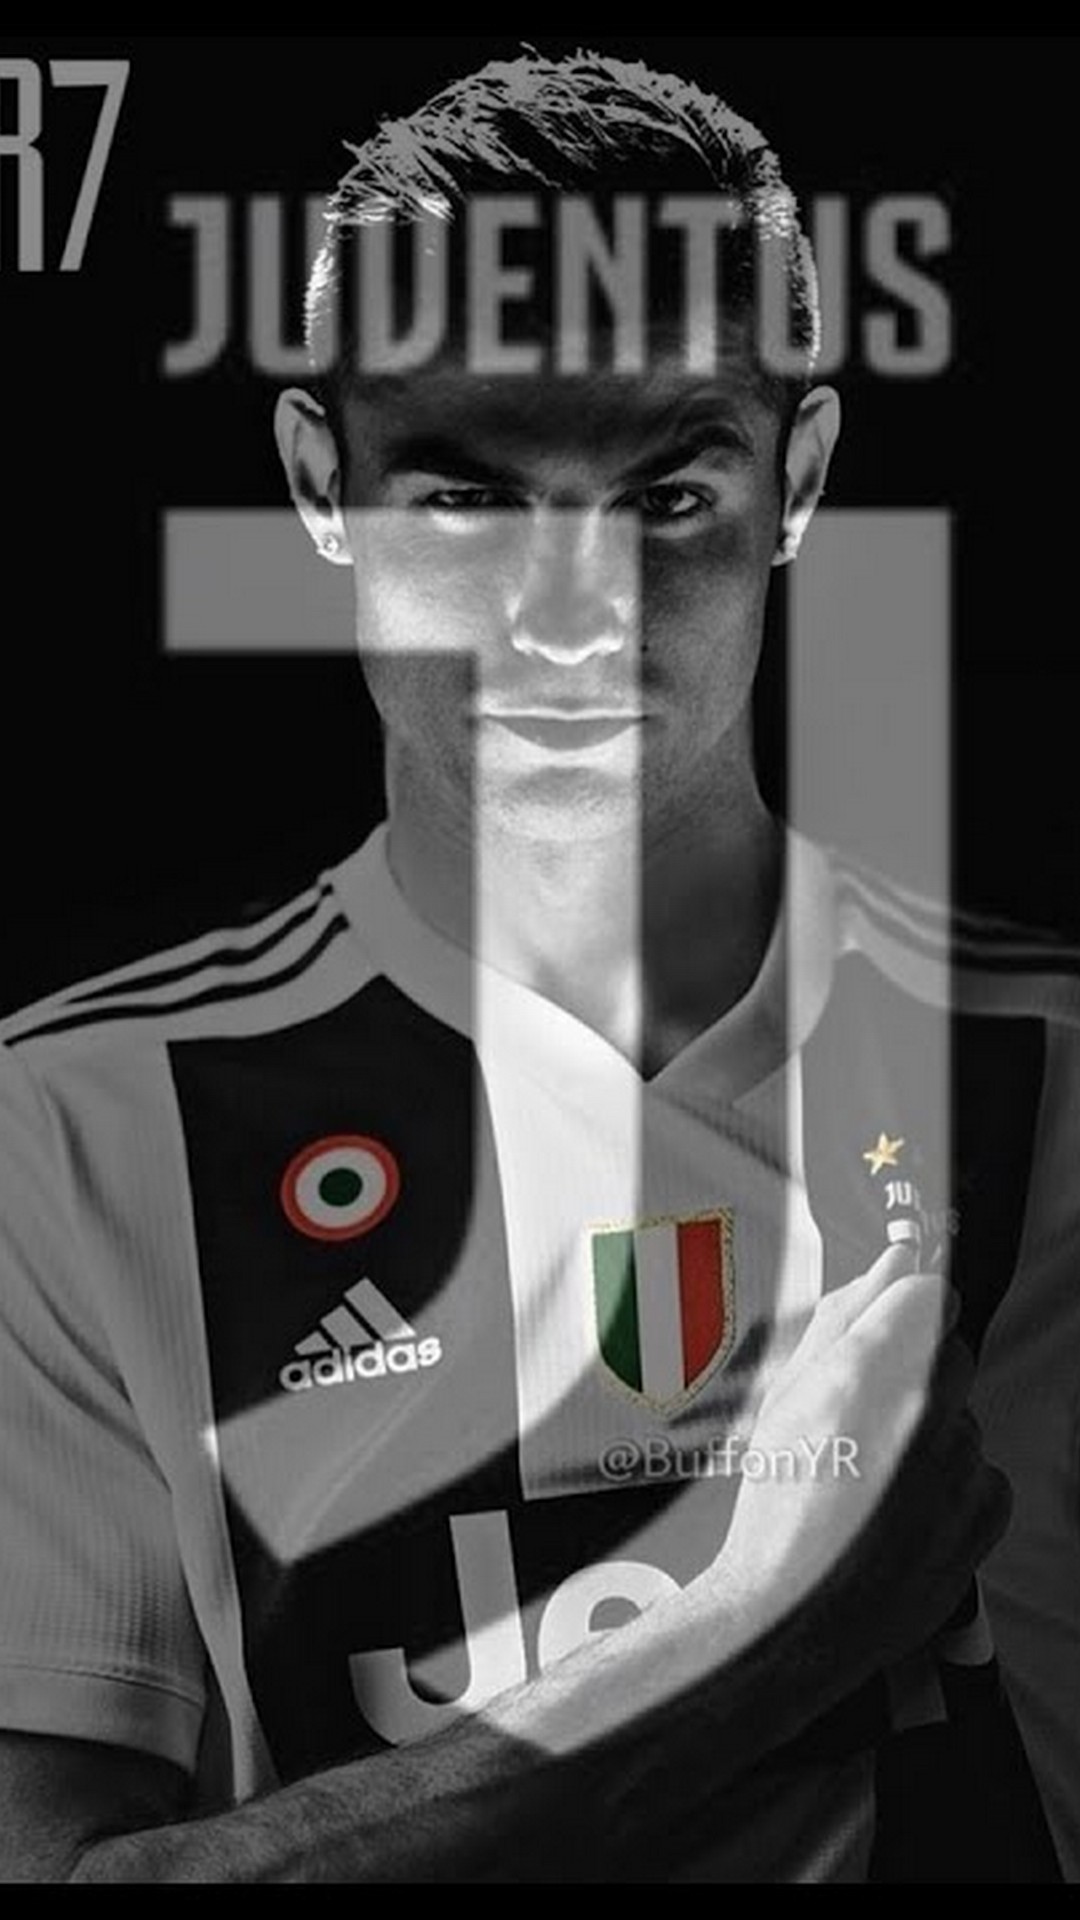 C Ronaldo Juventus Wallpaper For iPhone with resolution 1080X1920 pixel. You can make this wallpaper for your iPhone 5, 6, 7, 8, X backgrounds, Mobile Screensaver, or iPad Lock Screen